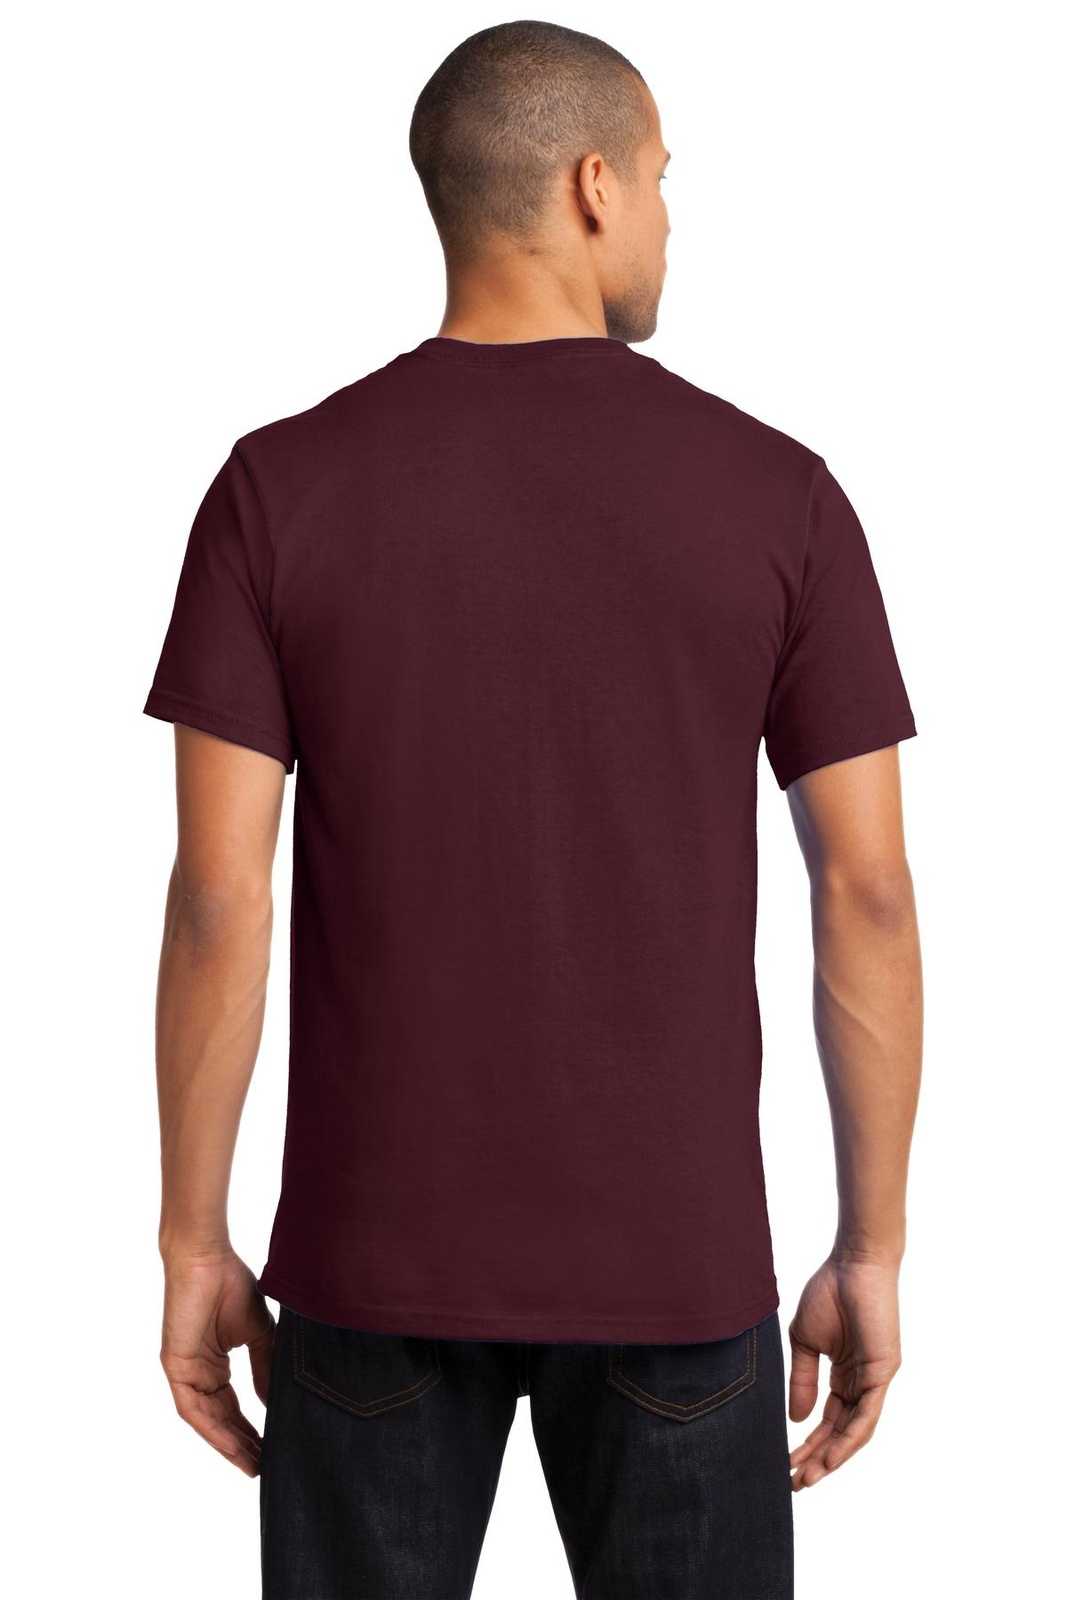 Port & Company PC61PT Tall Essential Pocket Tee - Athletic Maroon - HIT a Double - 1